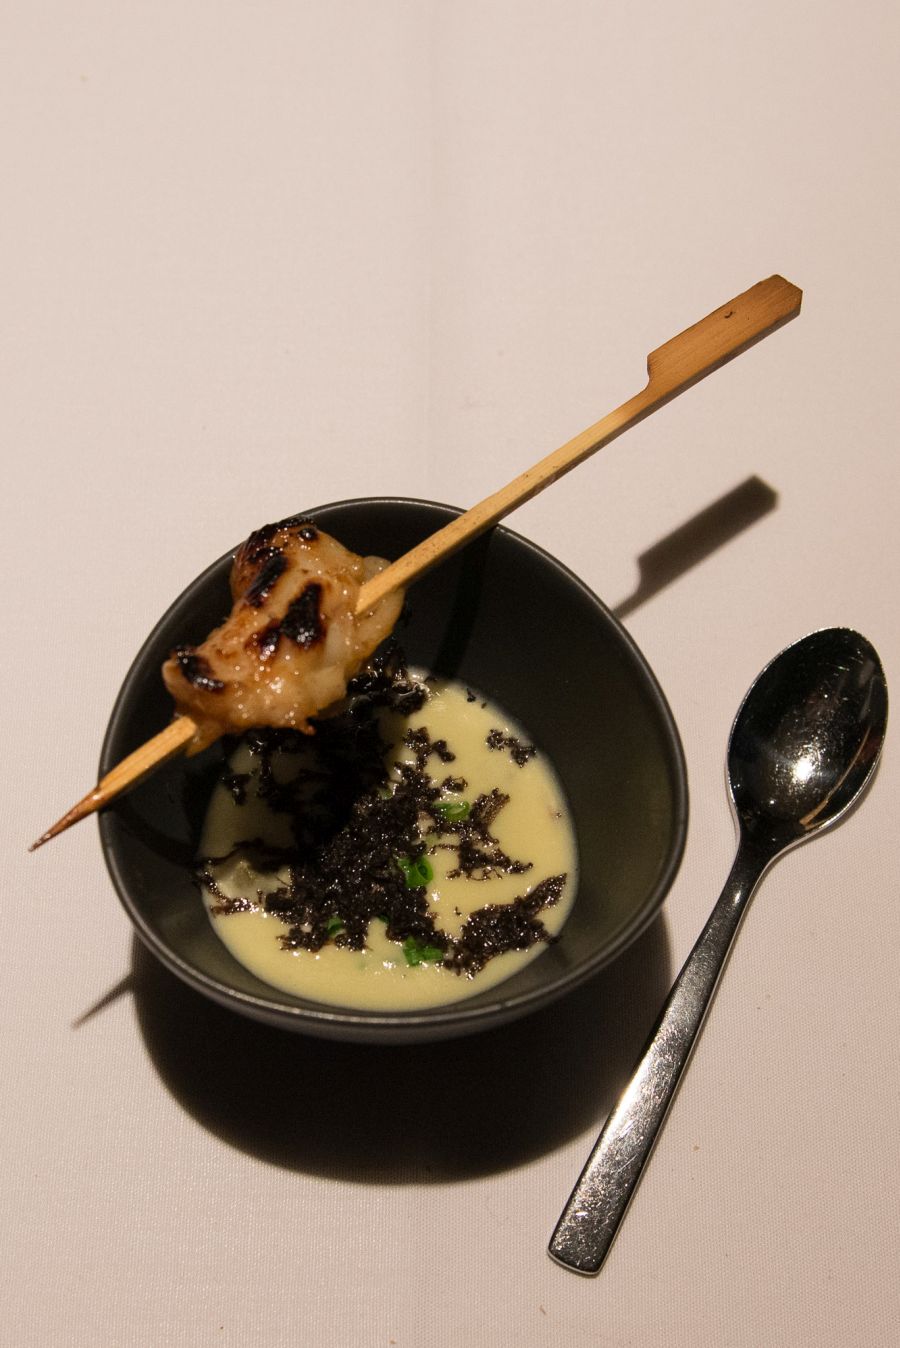 Surprise course: oyster and leek soup with manjimup truffle and Broome bug